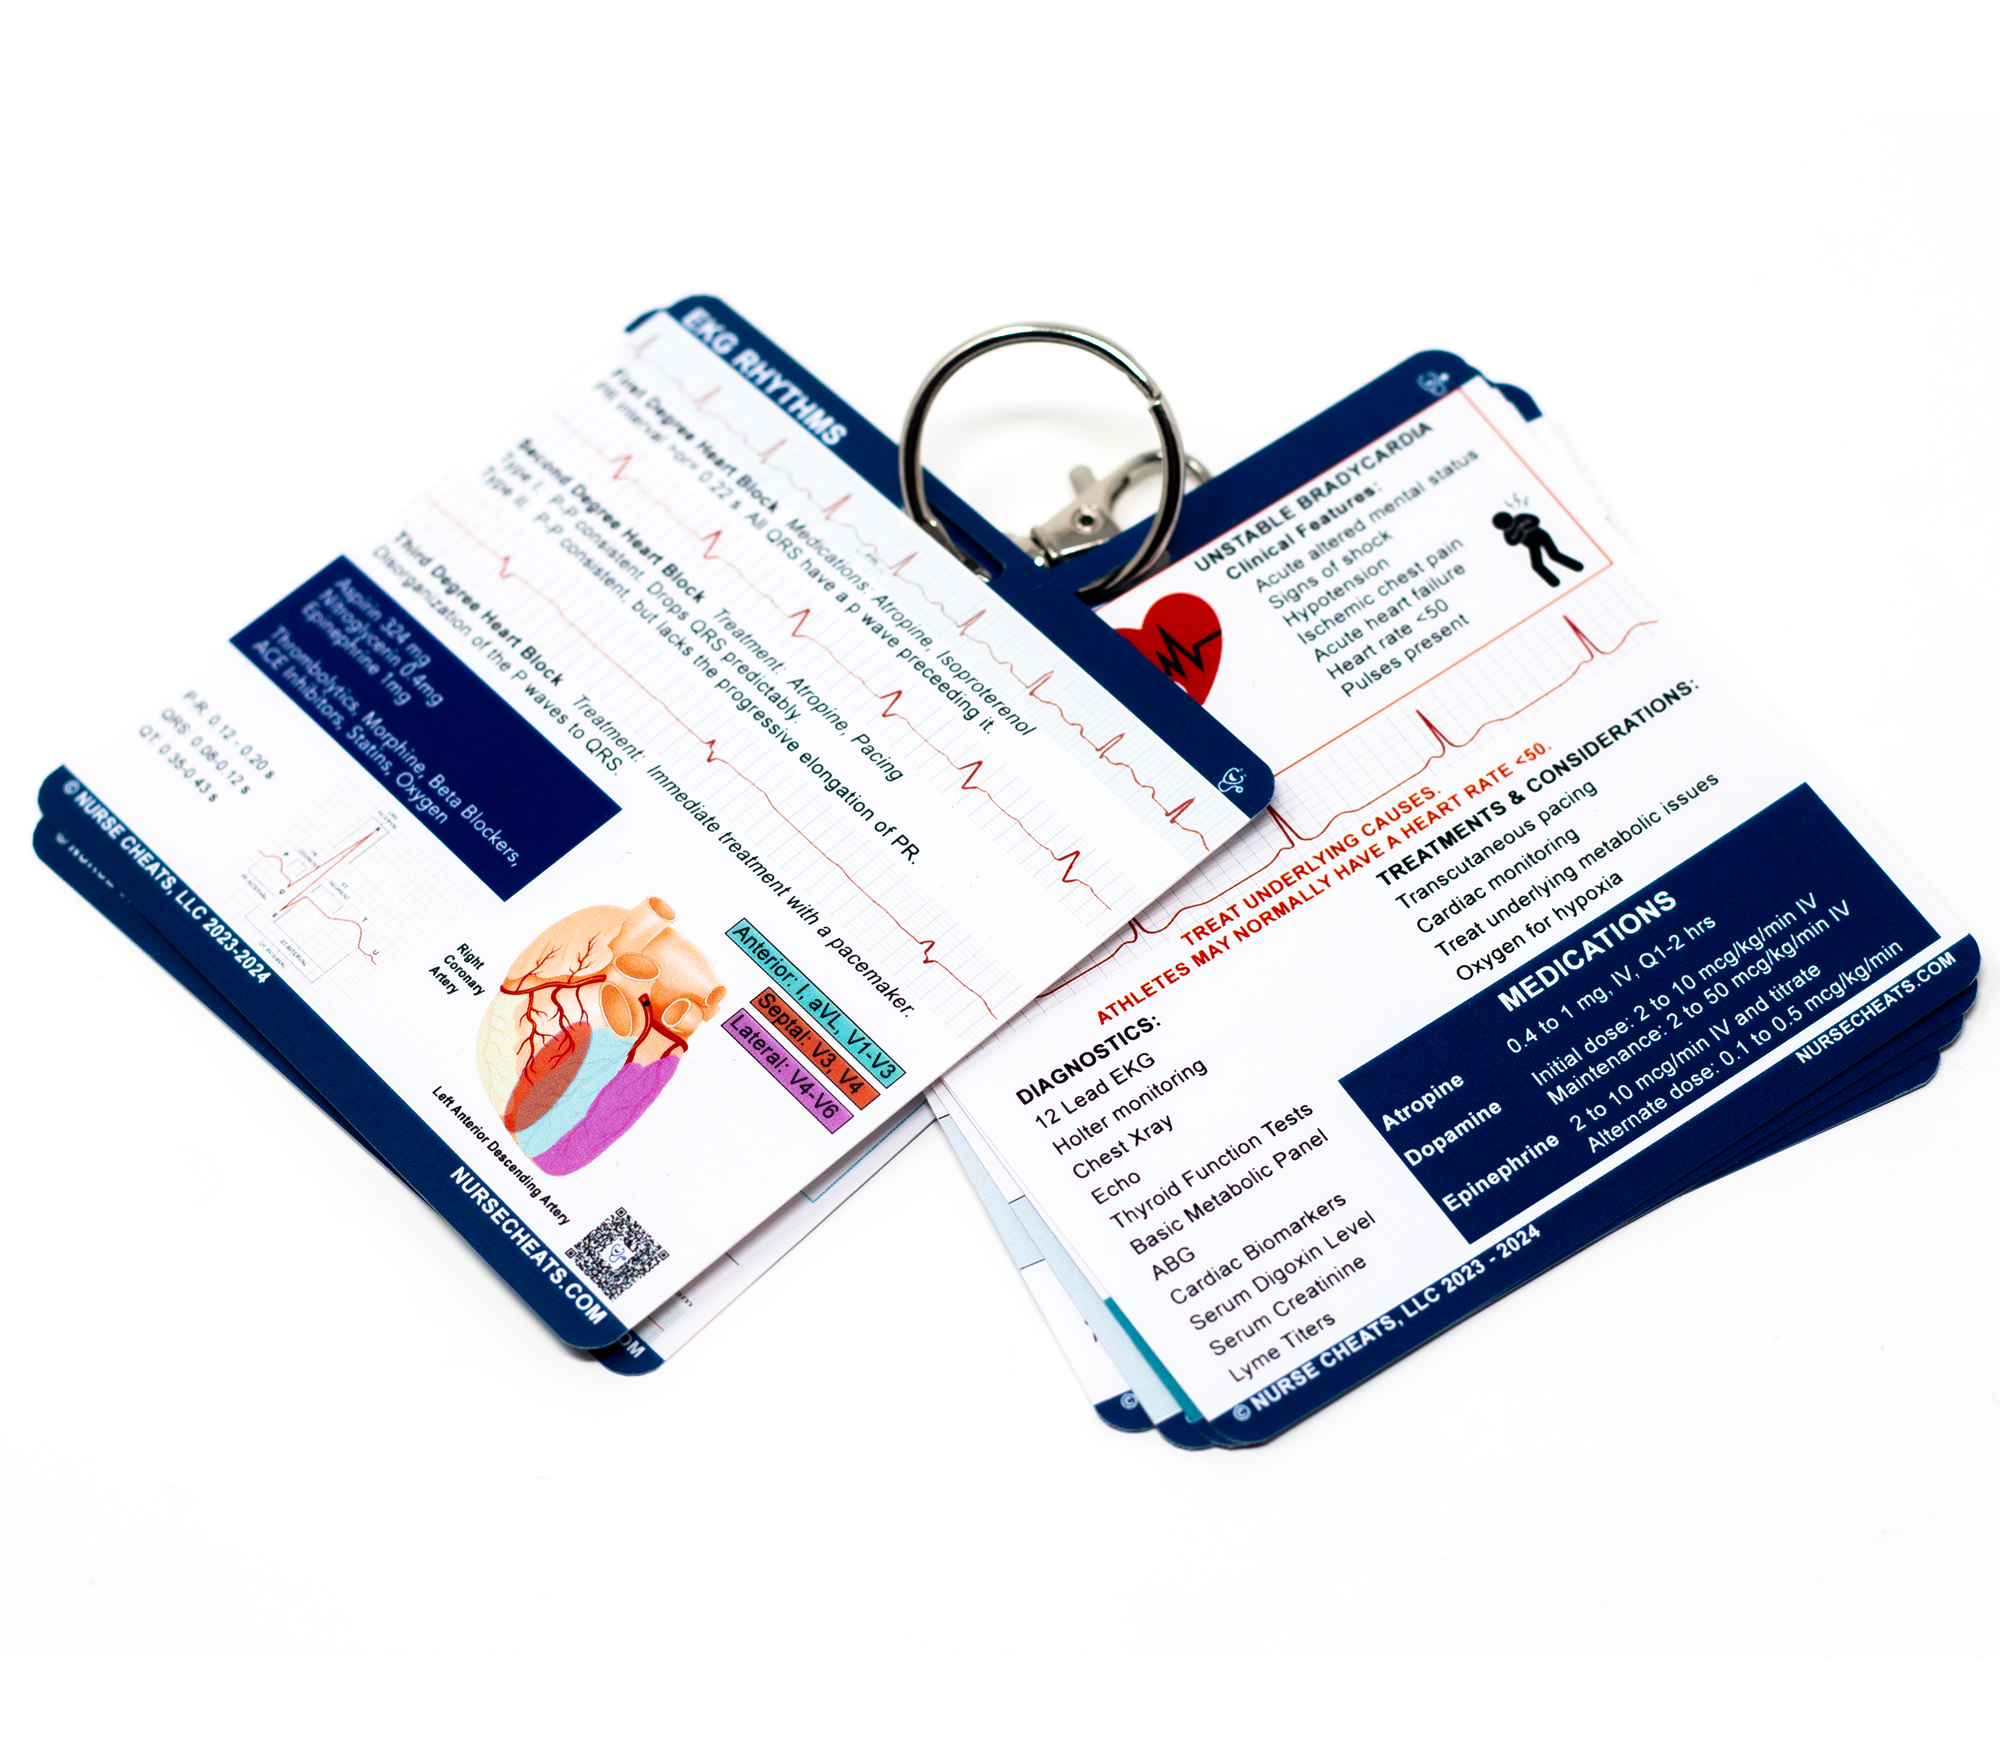 The standard edition of our cardiac badge book contains EKG tips, EKG Rhythms, Bradycardia, Tachycardia, MI, Levophed, and Cardiac Drips. (Our drips section has been confirmed by a board-certified Pharmacist).